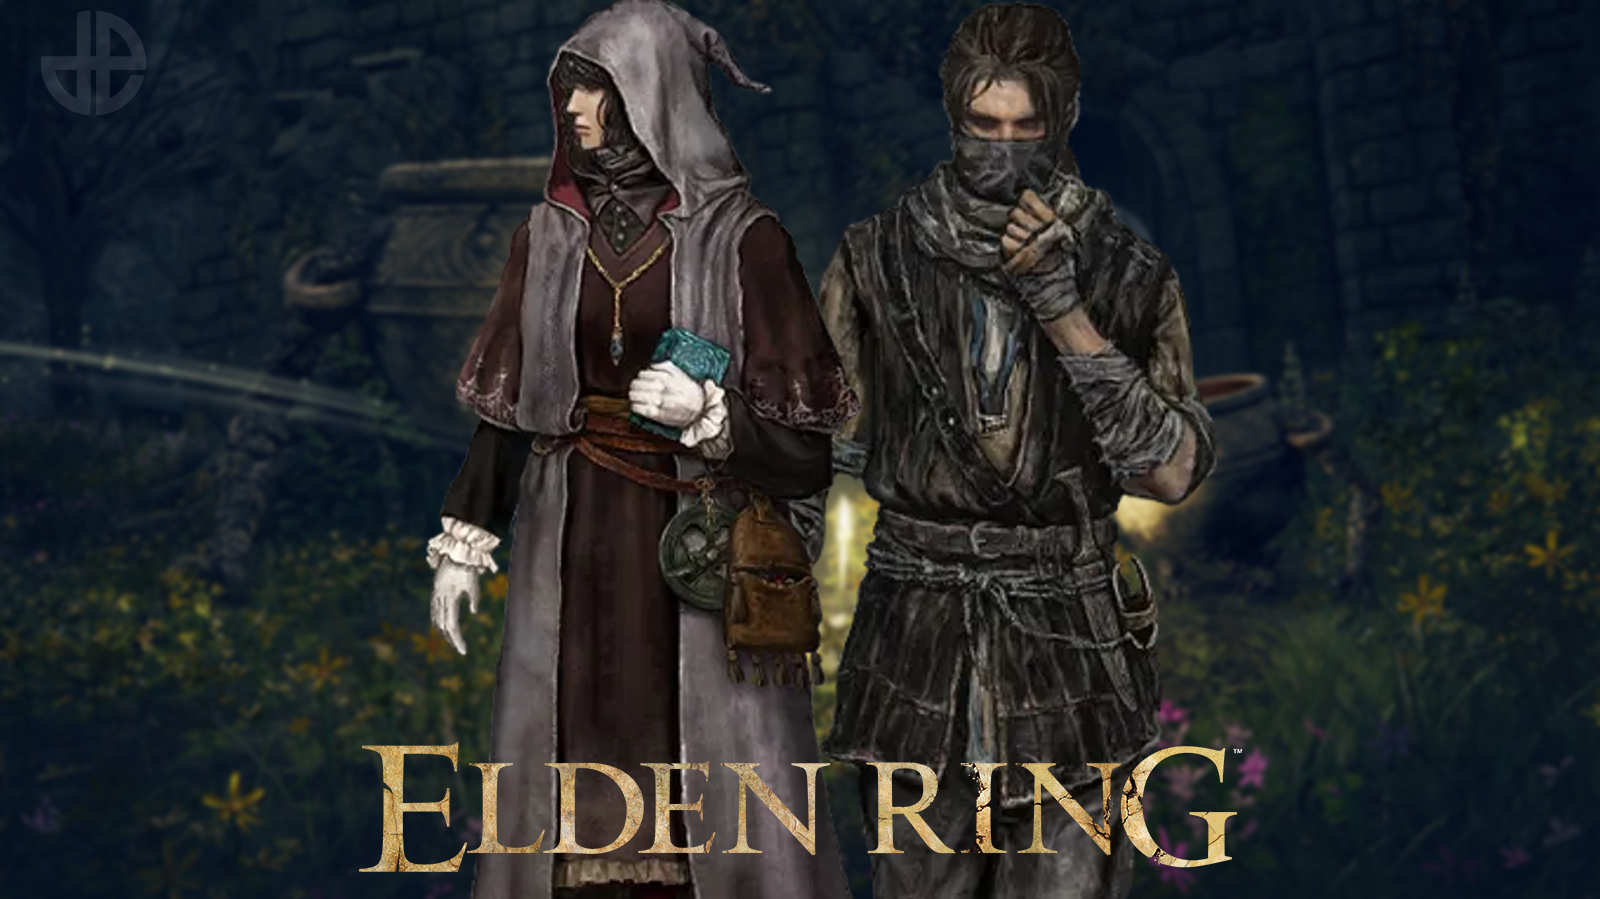 What happens when players choose Rebirth in Elden Ring?